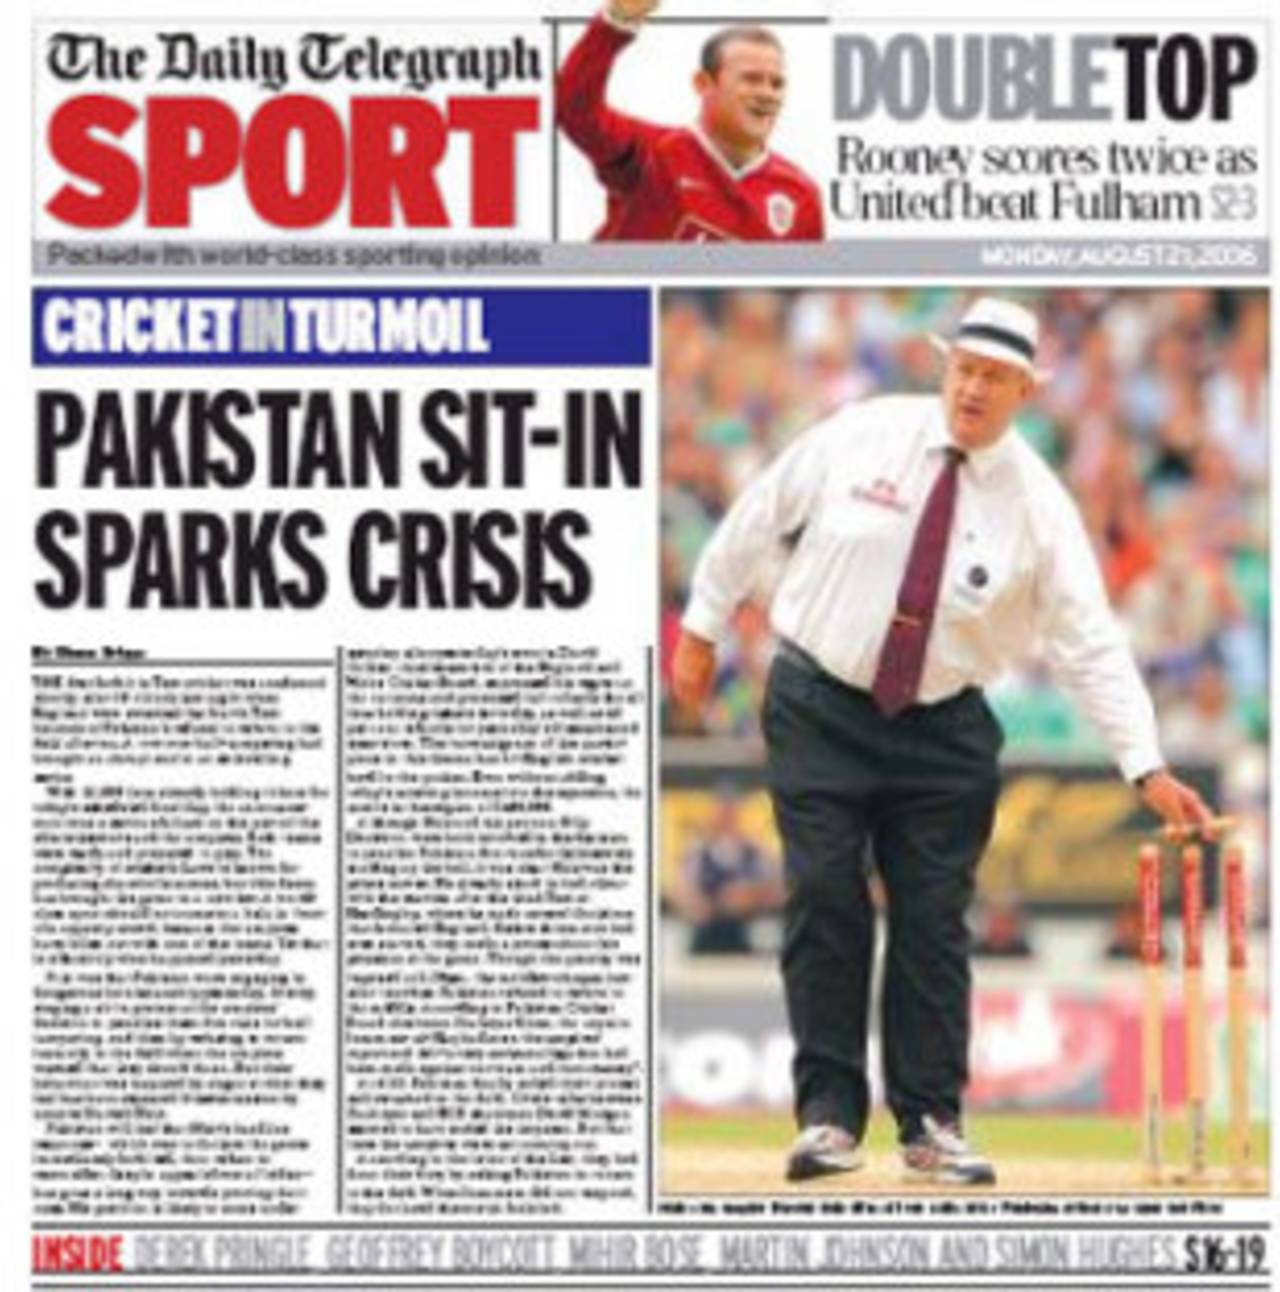 <I>The Daily Telegraph</B> reports on the crisis at The Oval, England v Pakistan, 4th Test, The Oval, August 21, 2006